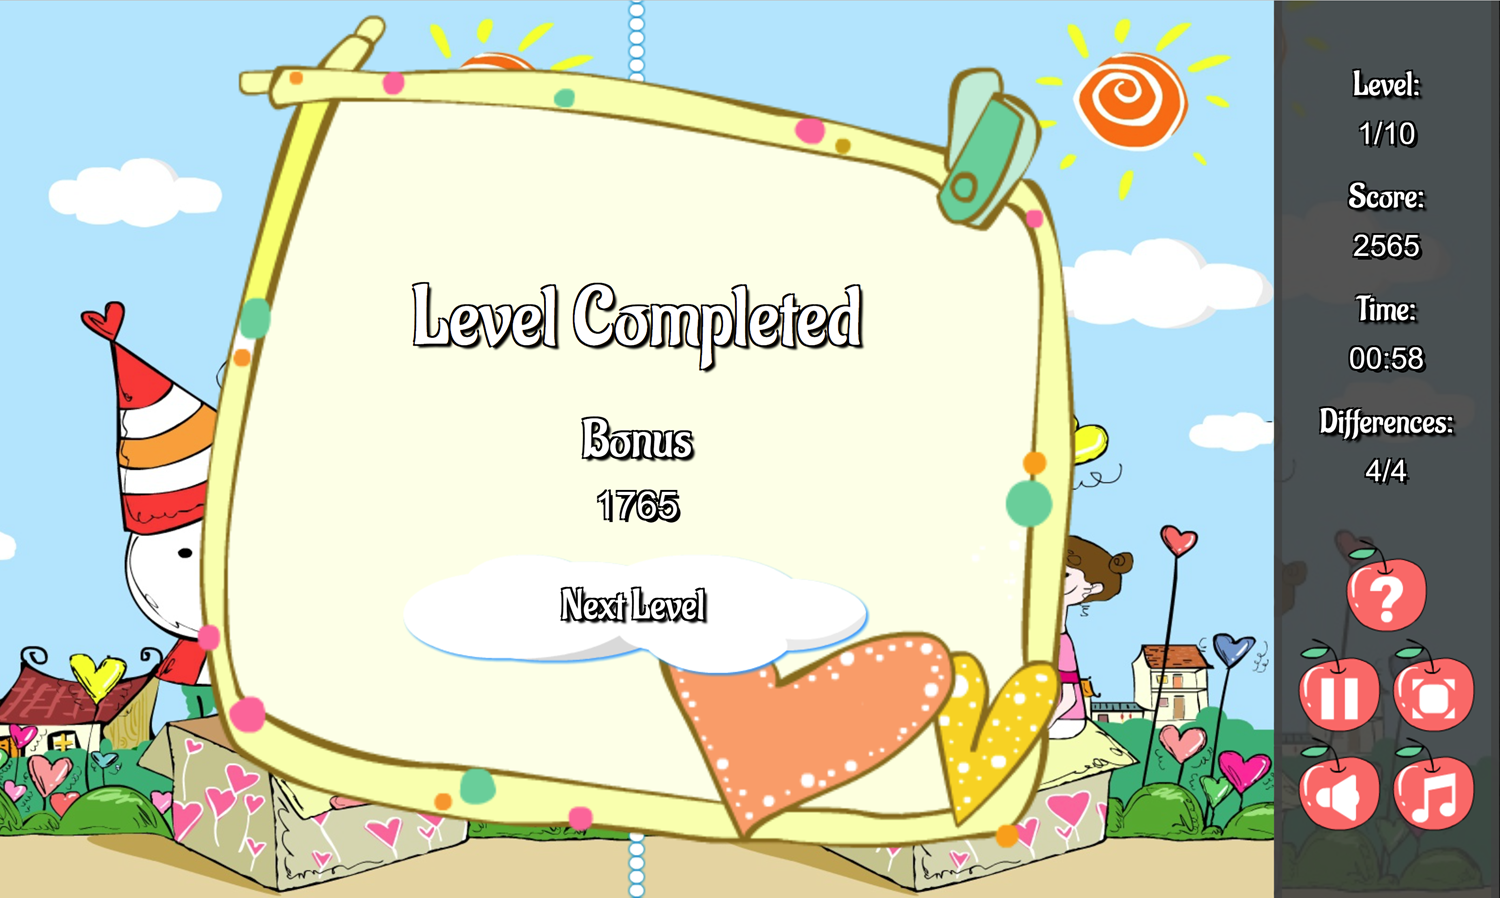 Playground Differences Game Level Completed Screen Screenshot.